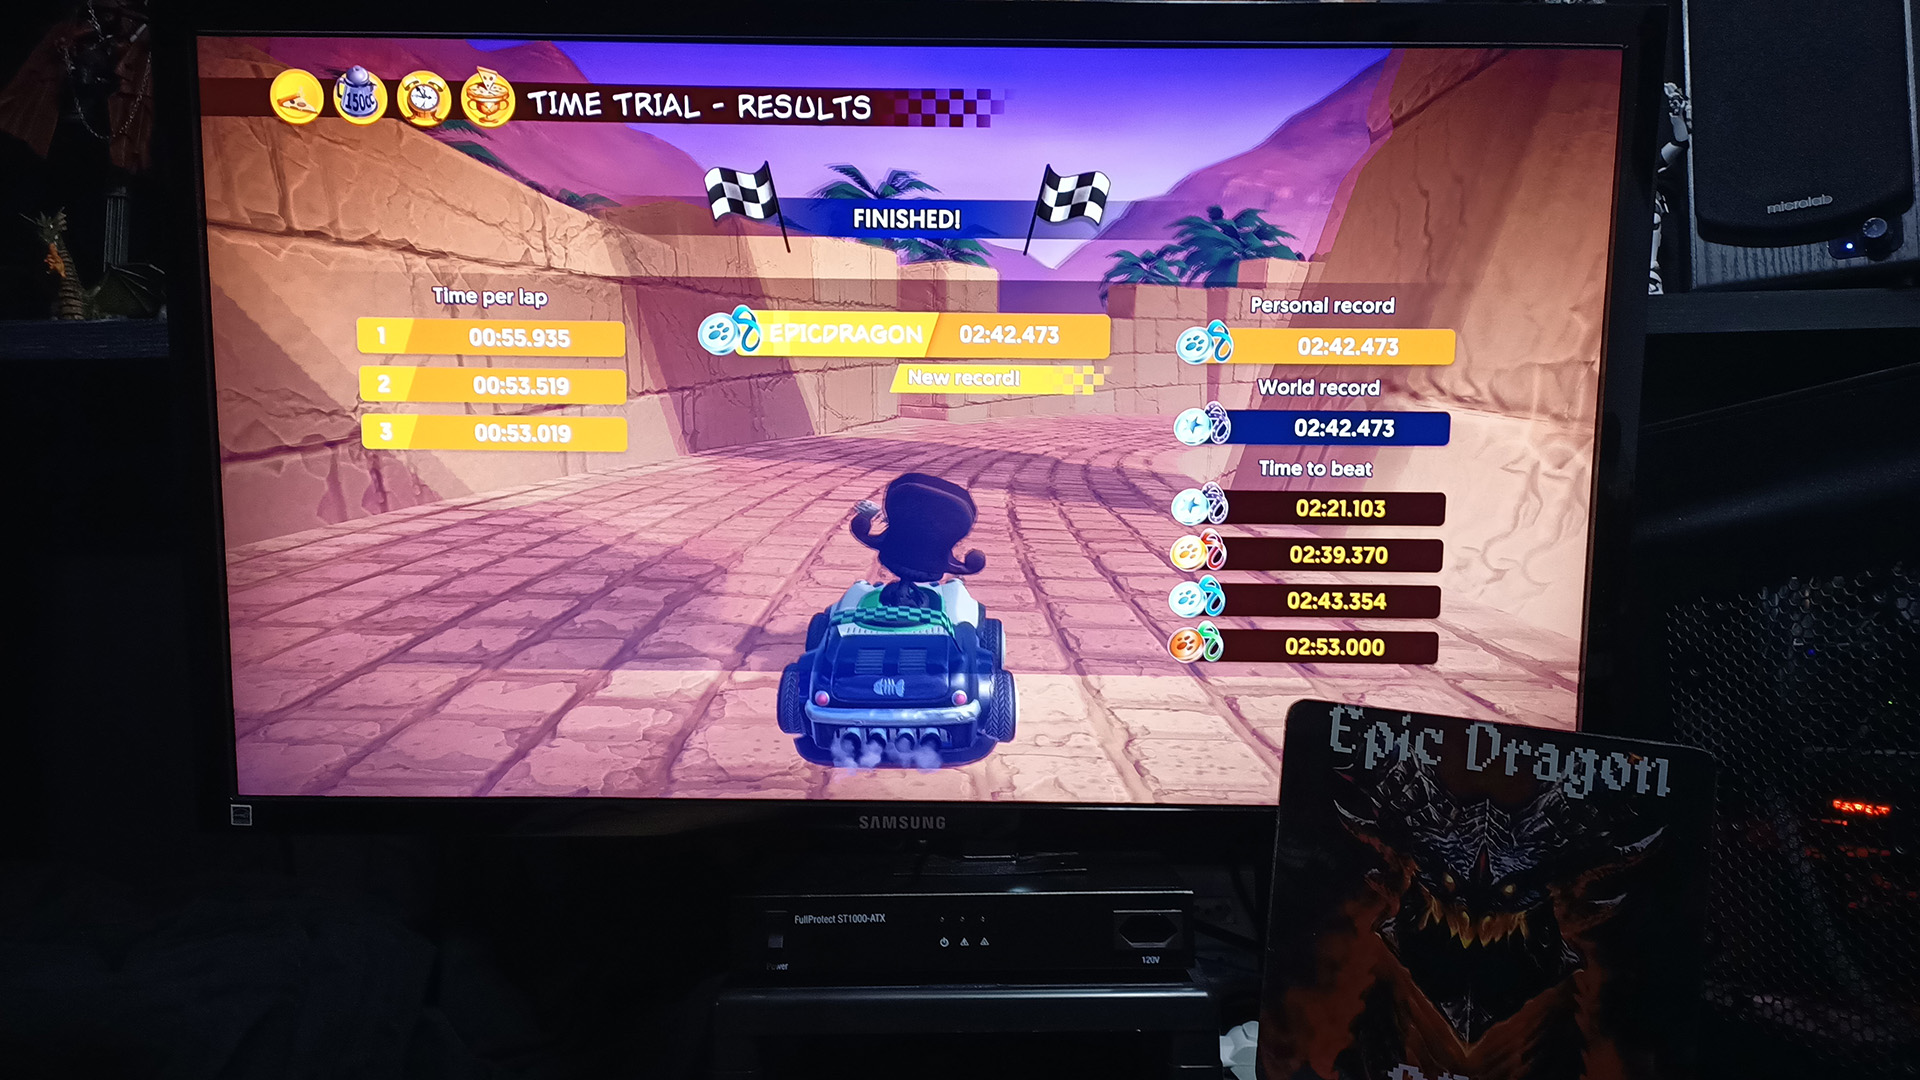 EpicDragon: Garfield Kart Furious Racing: Valley Of The Kings [Time Trial: Lap Time] (PC) 0:00:53.019 points on 2022-08-14 15:04:23